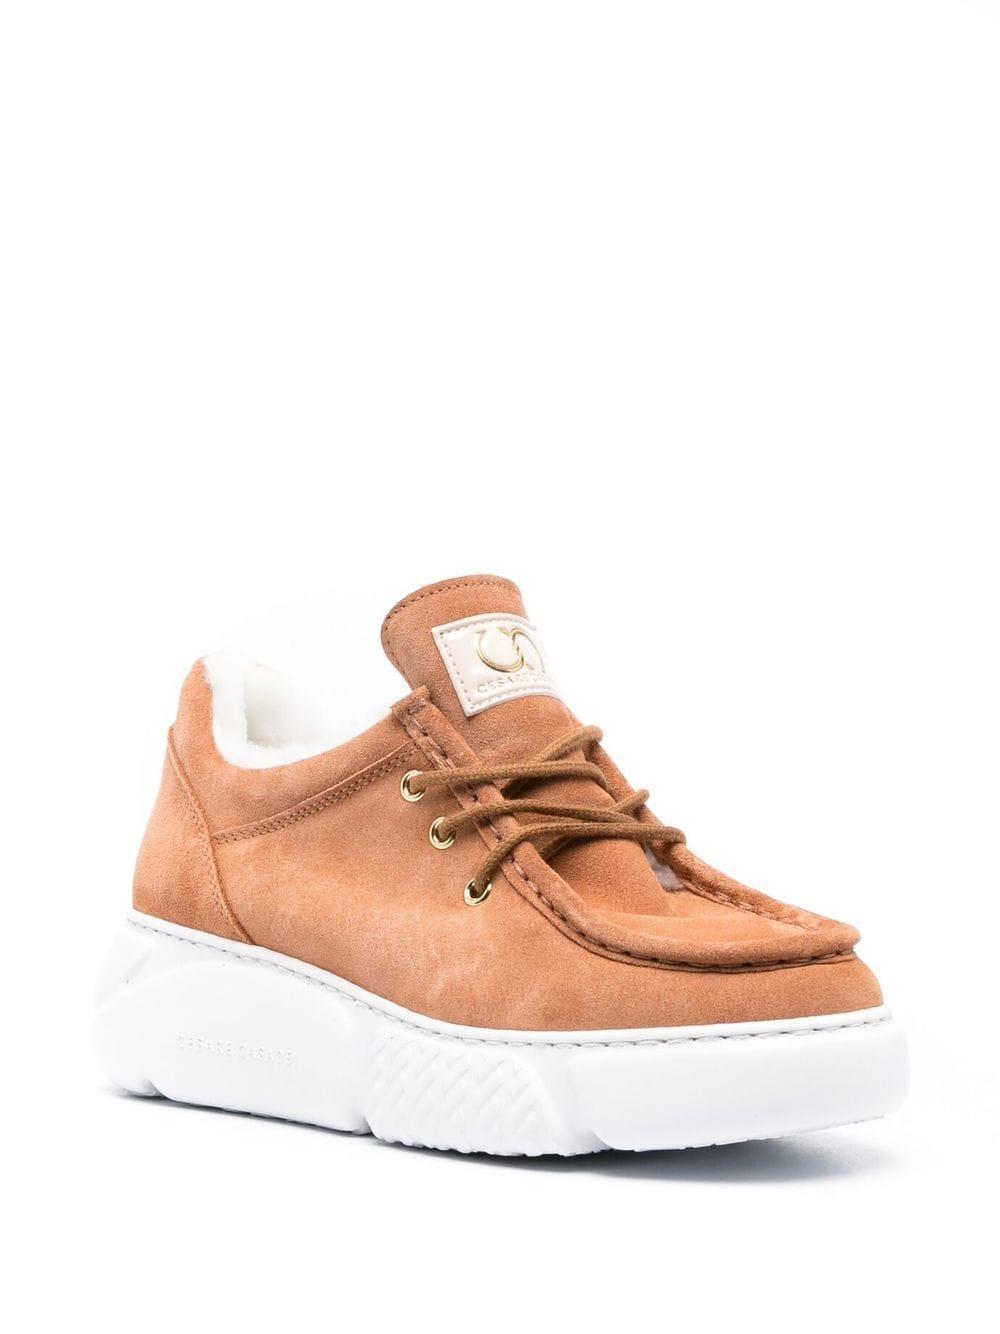 Casadei shearling-lined mid-top sneakers - Brown